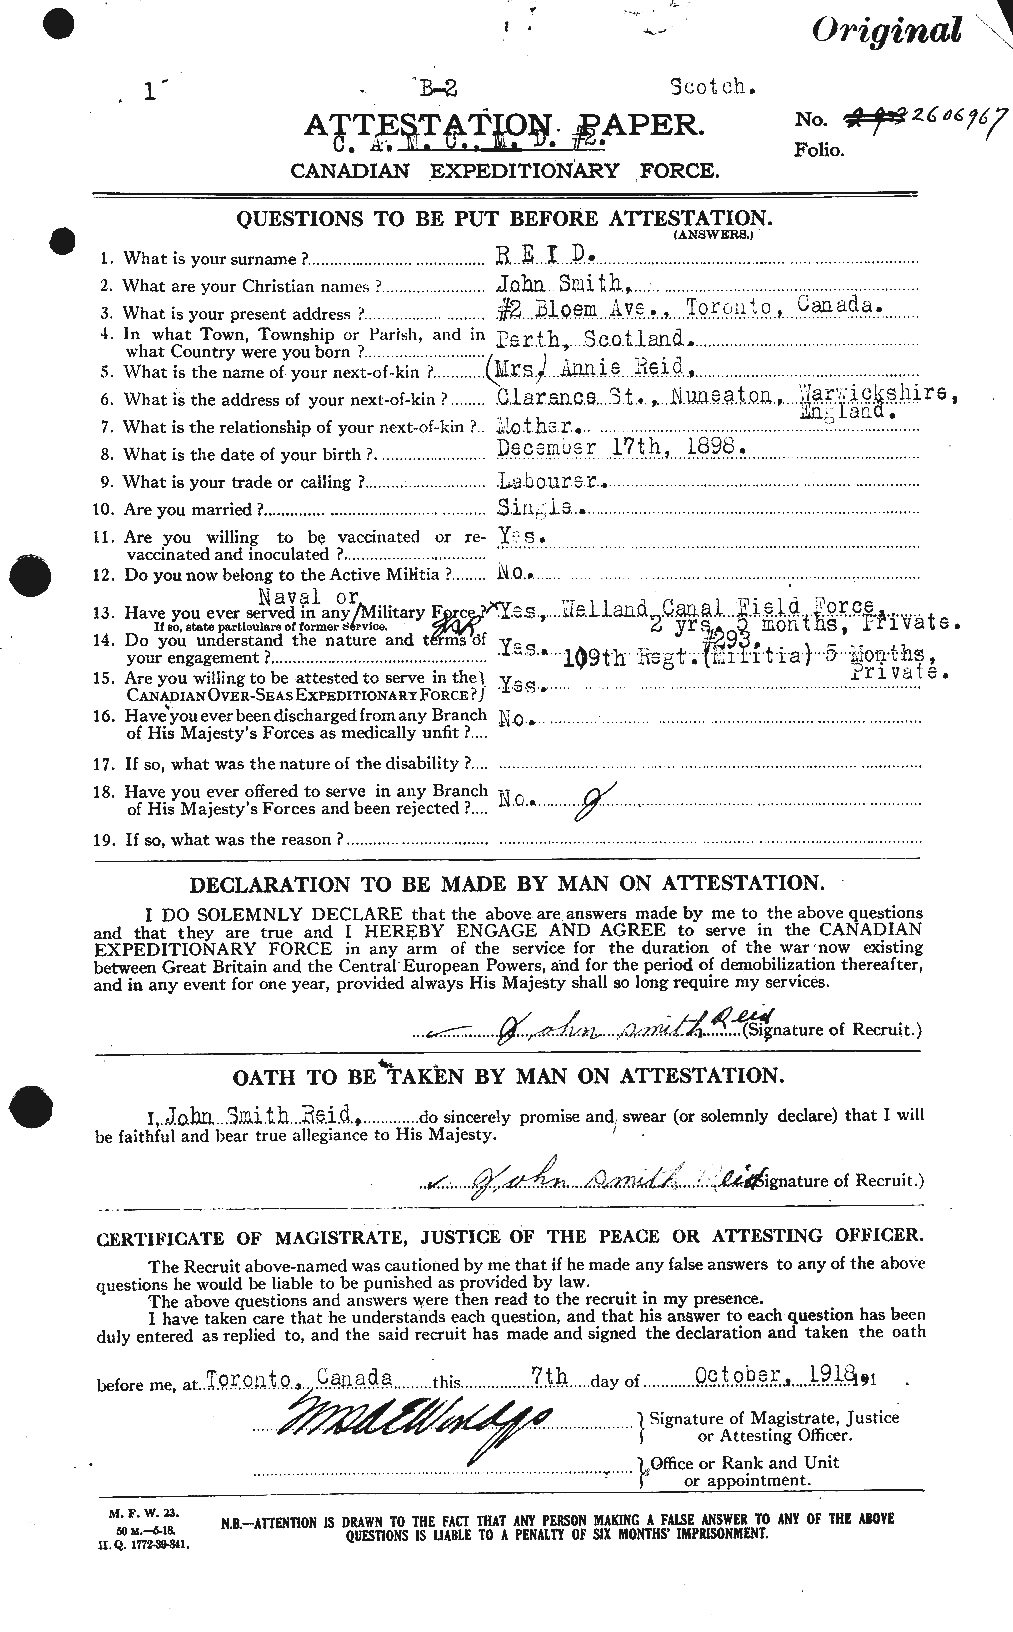 Personnel Records of the First World War - CEF 598874a